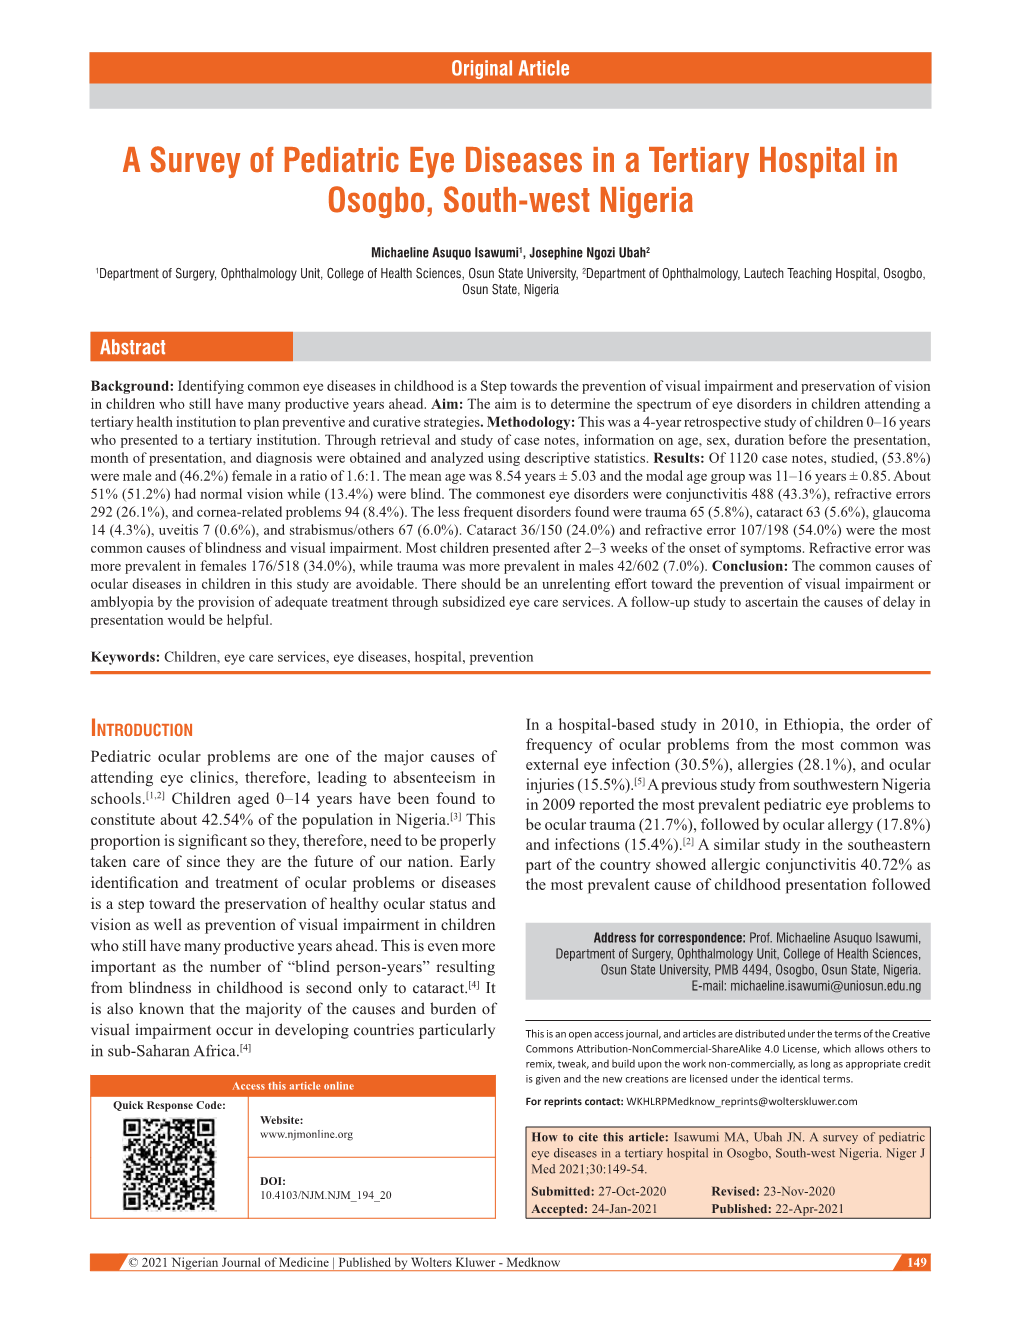 A Survey of Pediatric Eye Diseases in a Tertiary Hospital in Osogbo, South‑West Nigeria